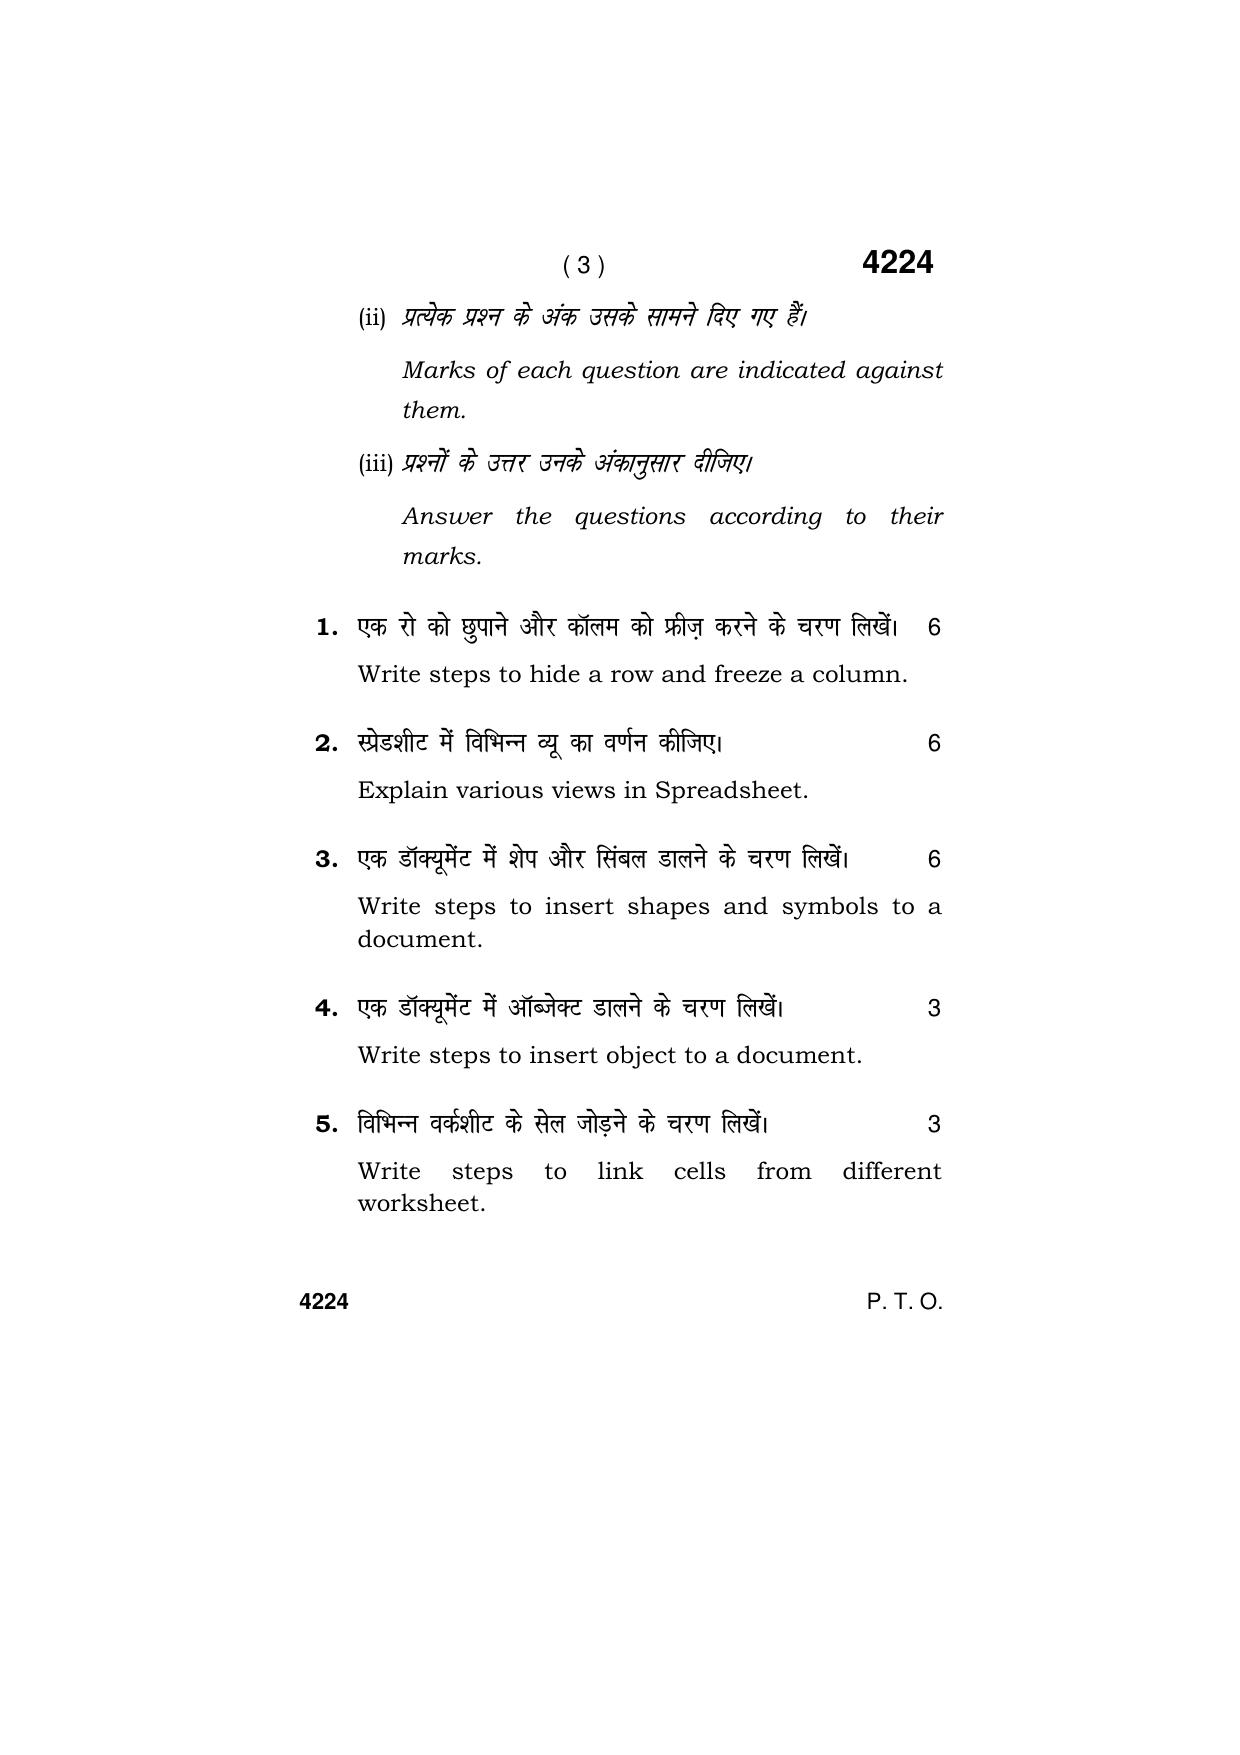 Haryana Board HBSE Class 10 IT & ITES 2019 Question Paper - Page 3